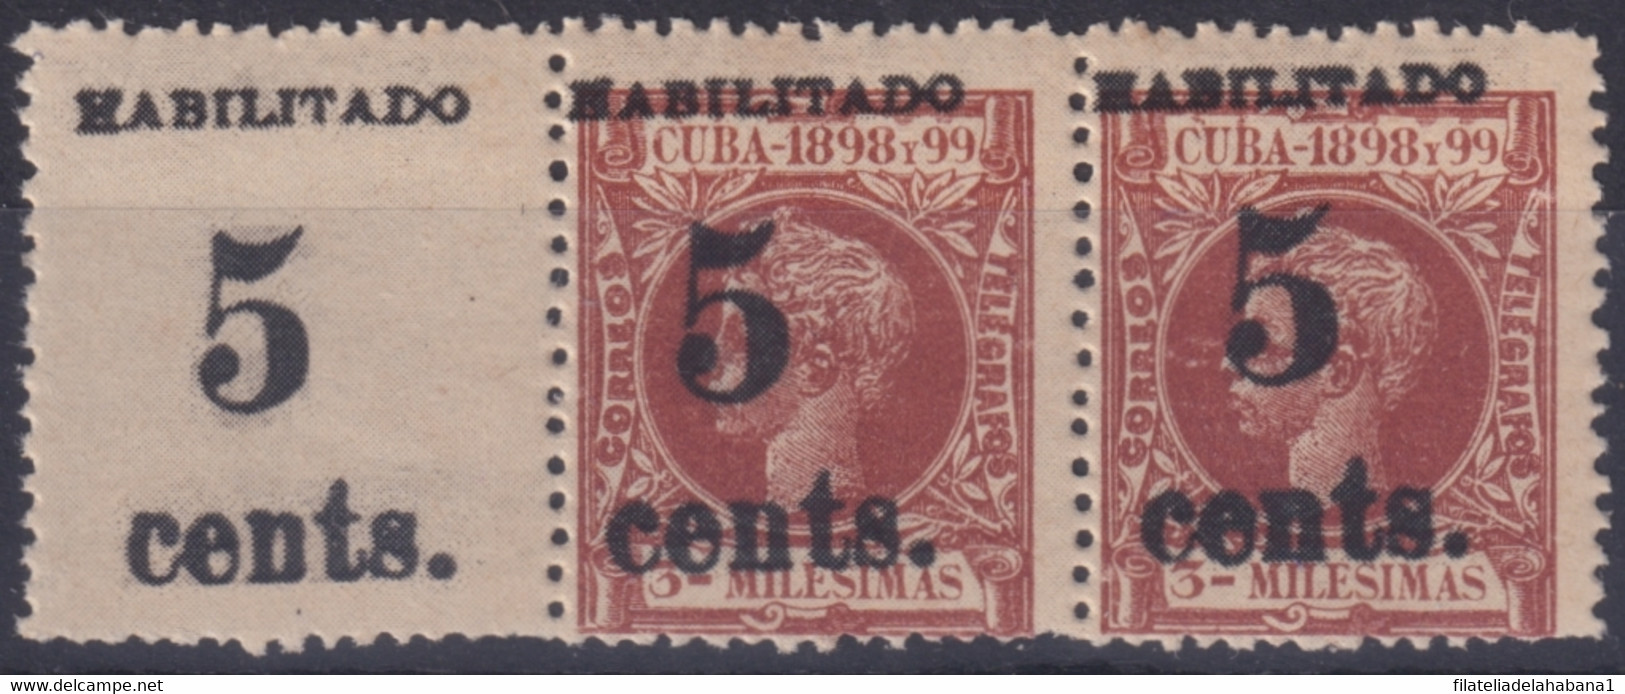 1899-494 CUBA 1899 5c S. 3c US OCCUPATION 2th ISSUE FINE NUMBER PHILATELIC FORGERY. - Unused Stamps